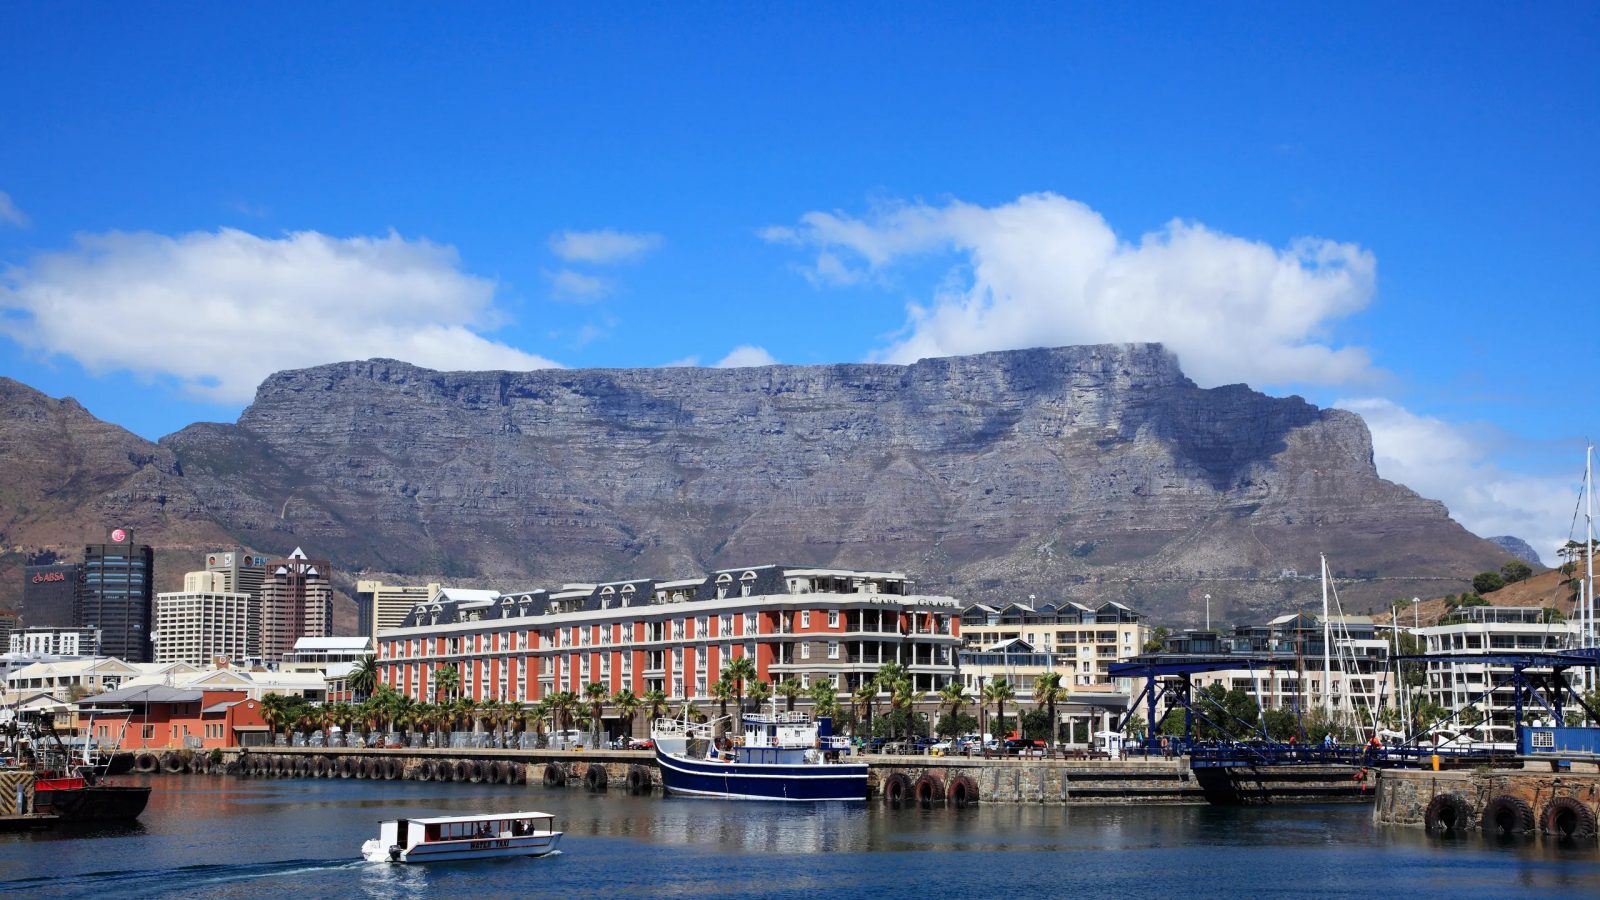 Even If You Don’t Know Much About Geography, Play This World Landmarks Quiz Anyway Table Mountain, Cape Town, South Africa